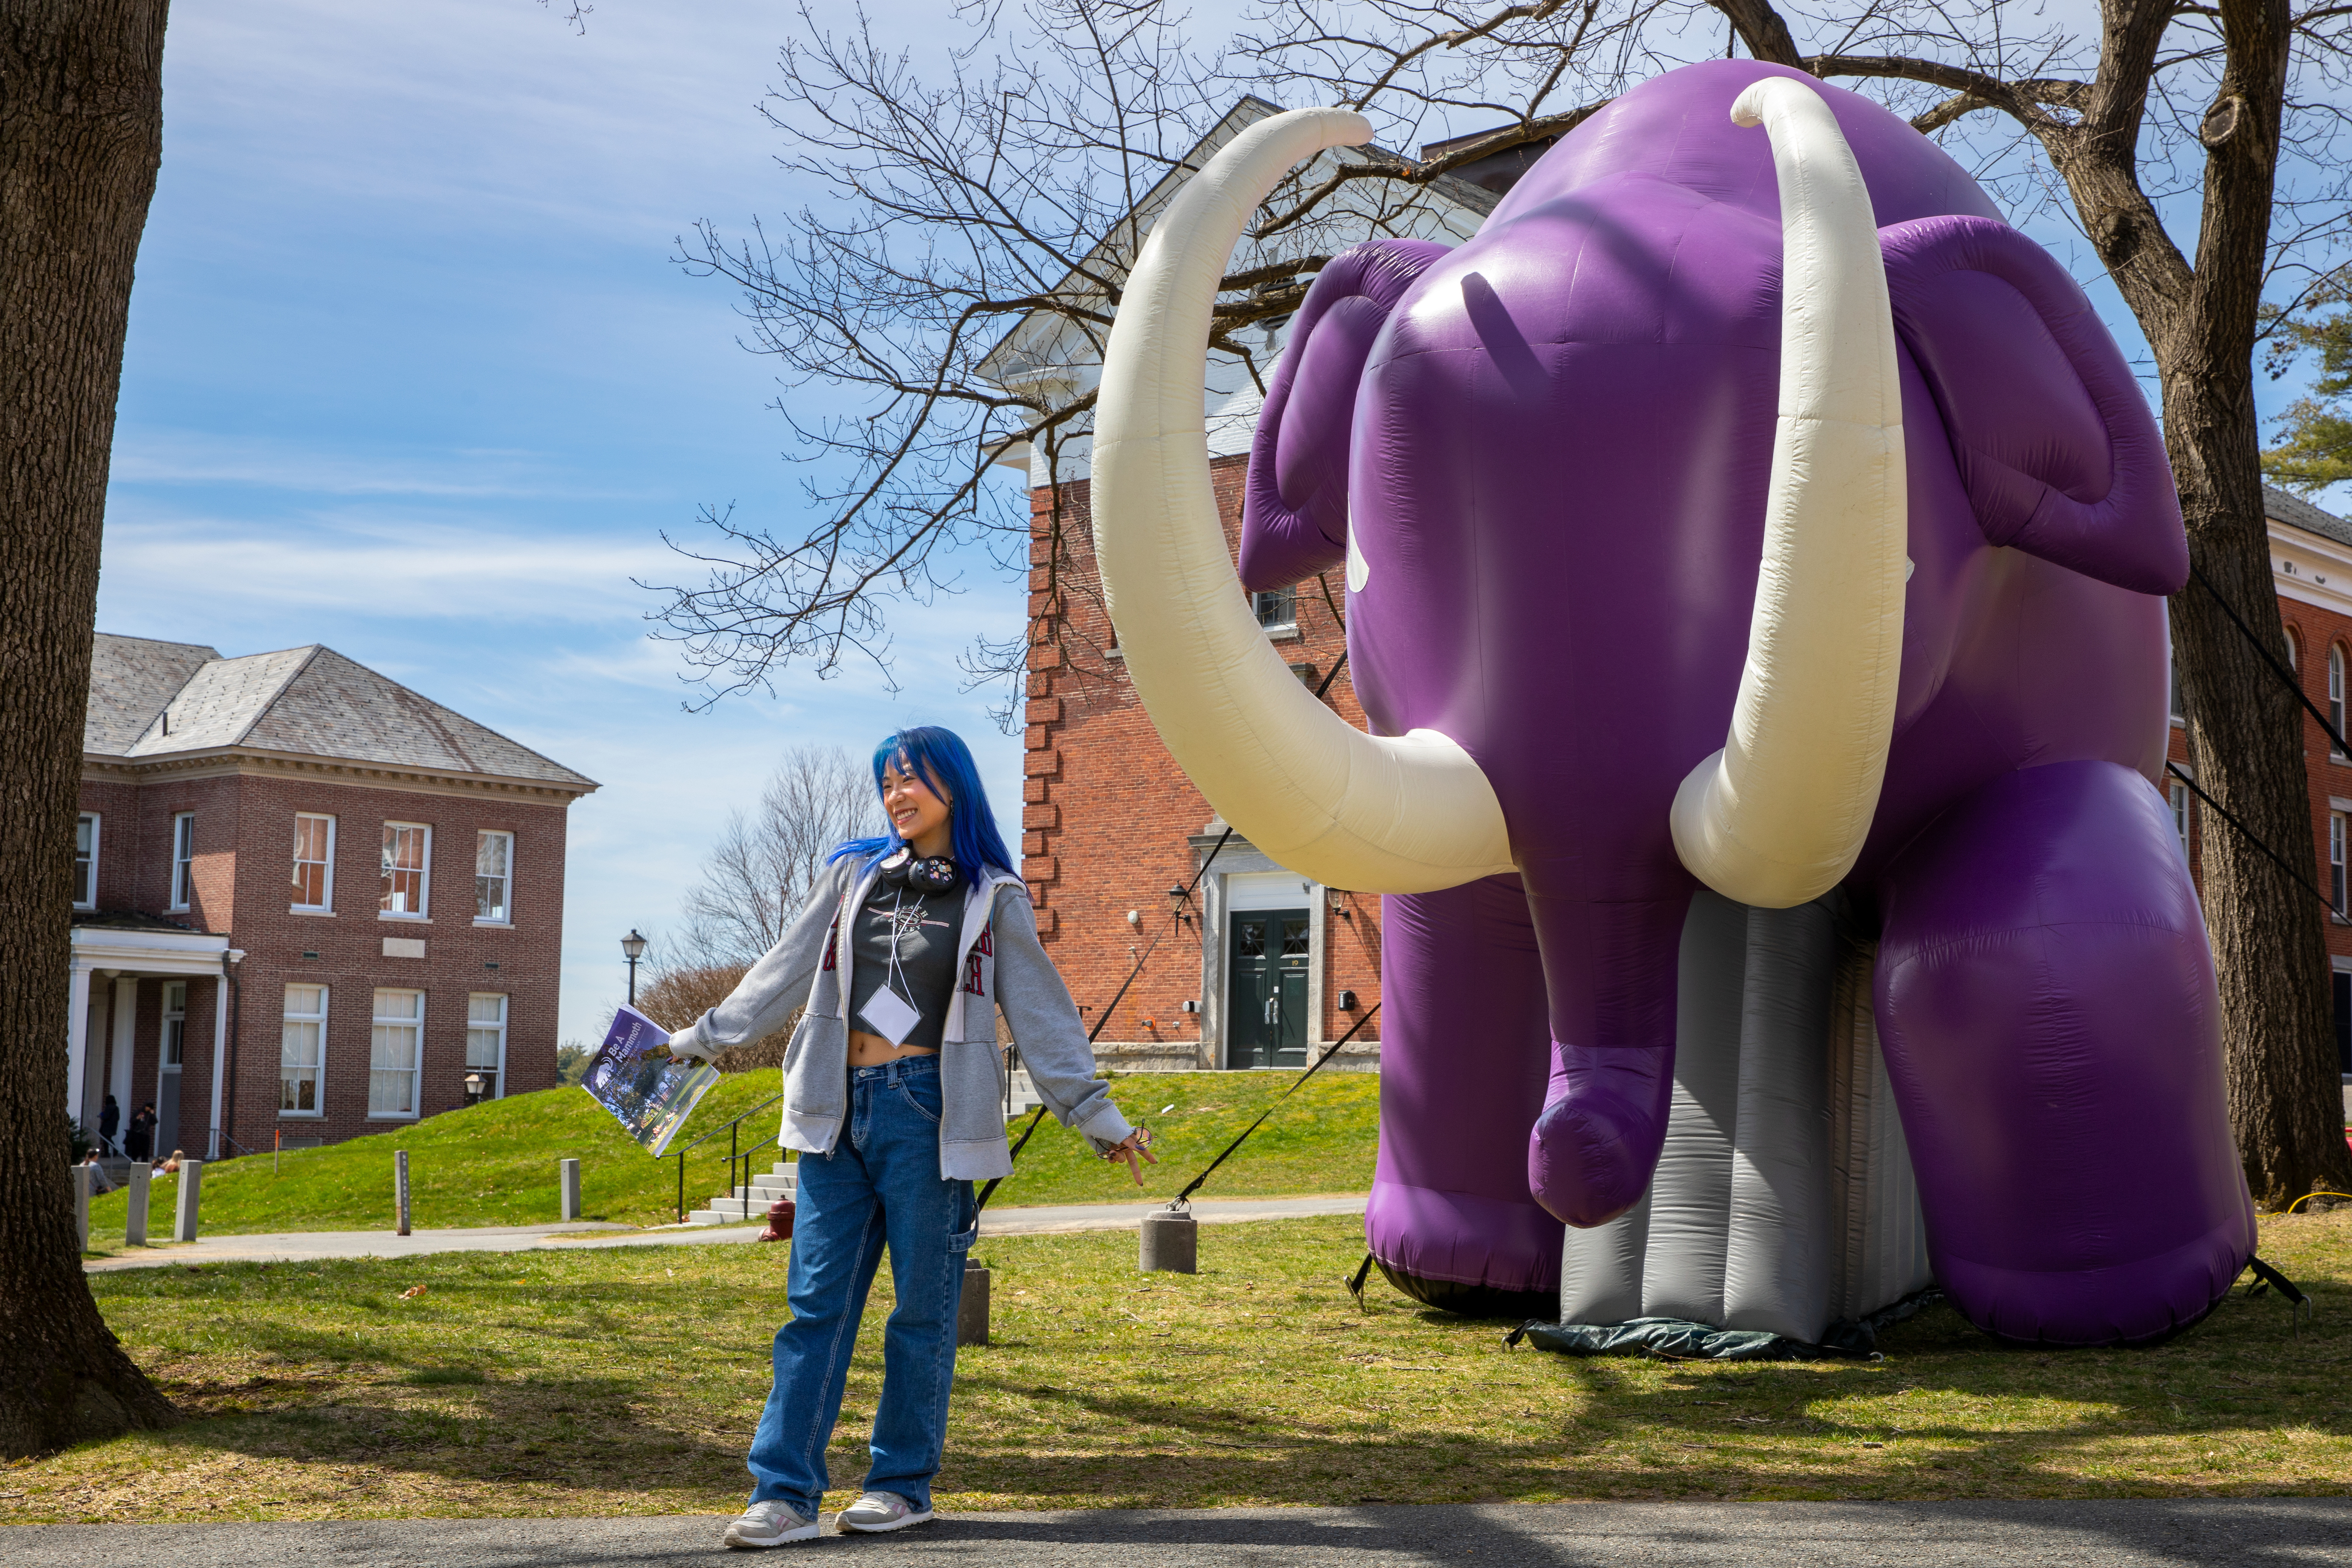 A woman poses in front of a large purple blow up mammoth.